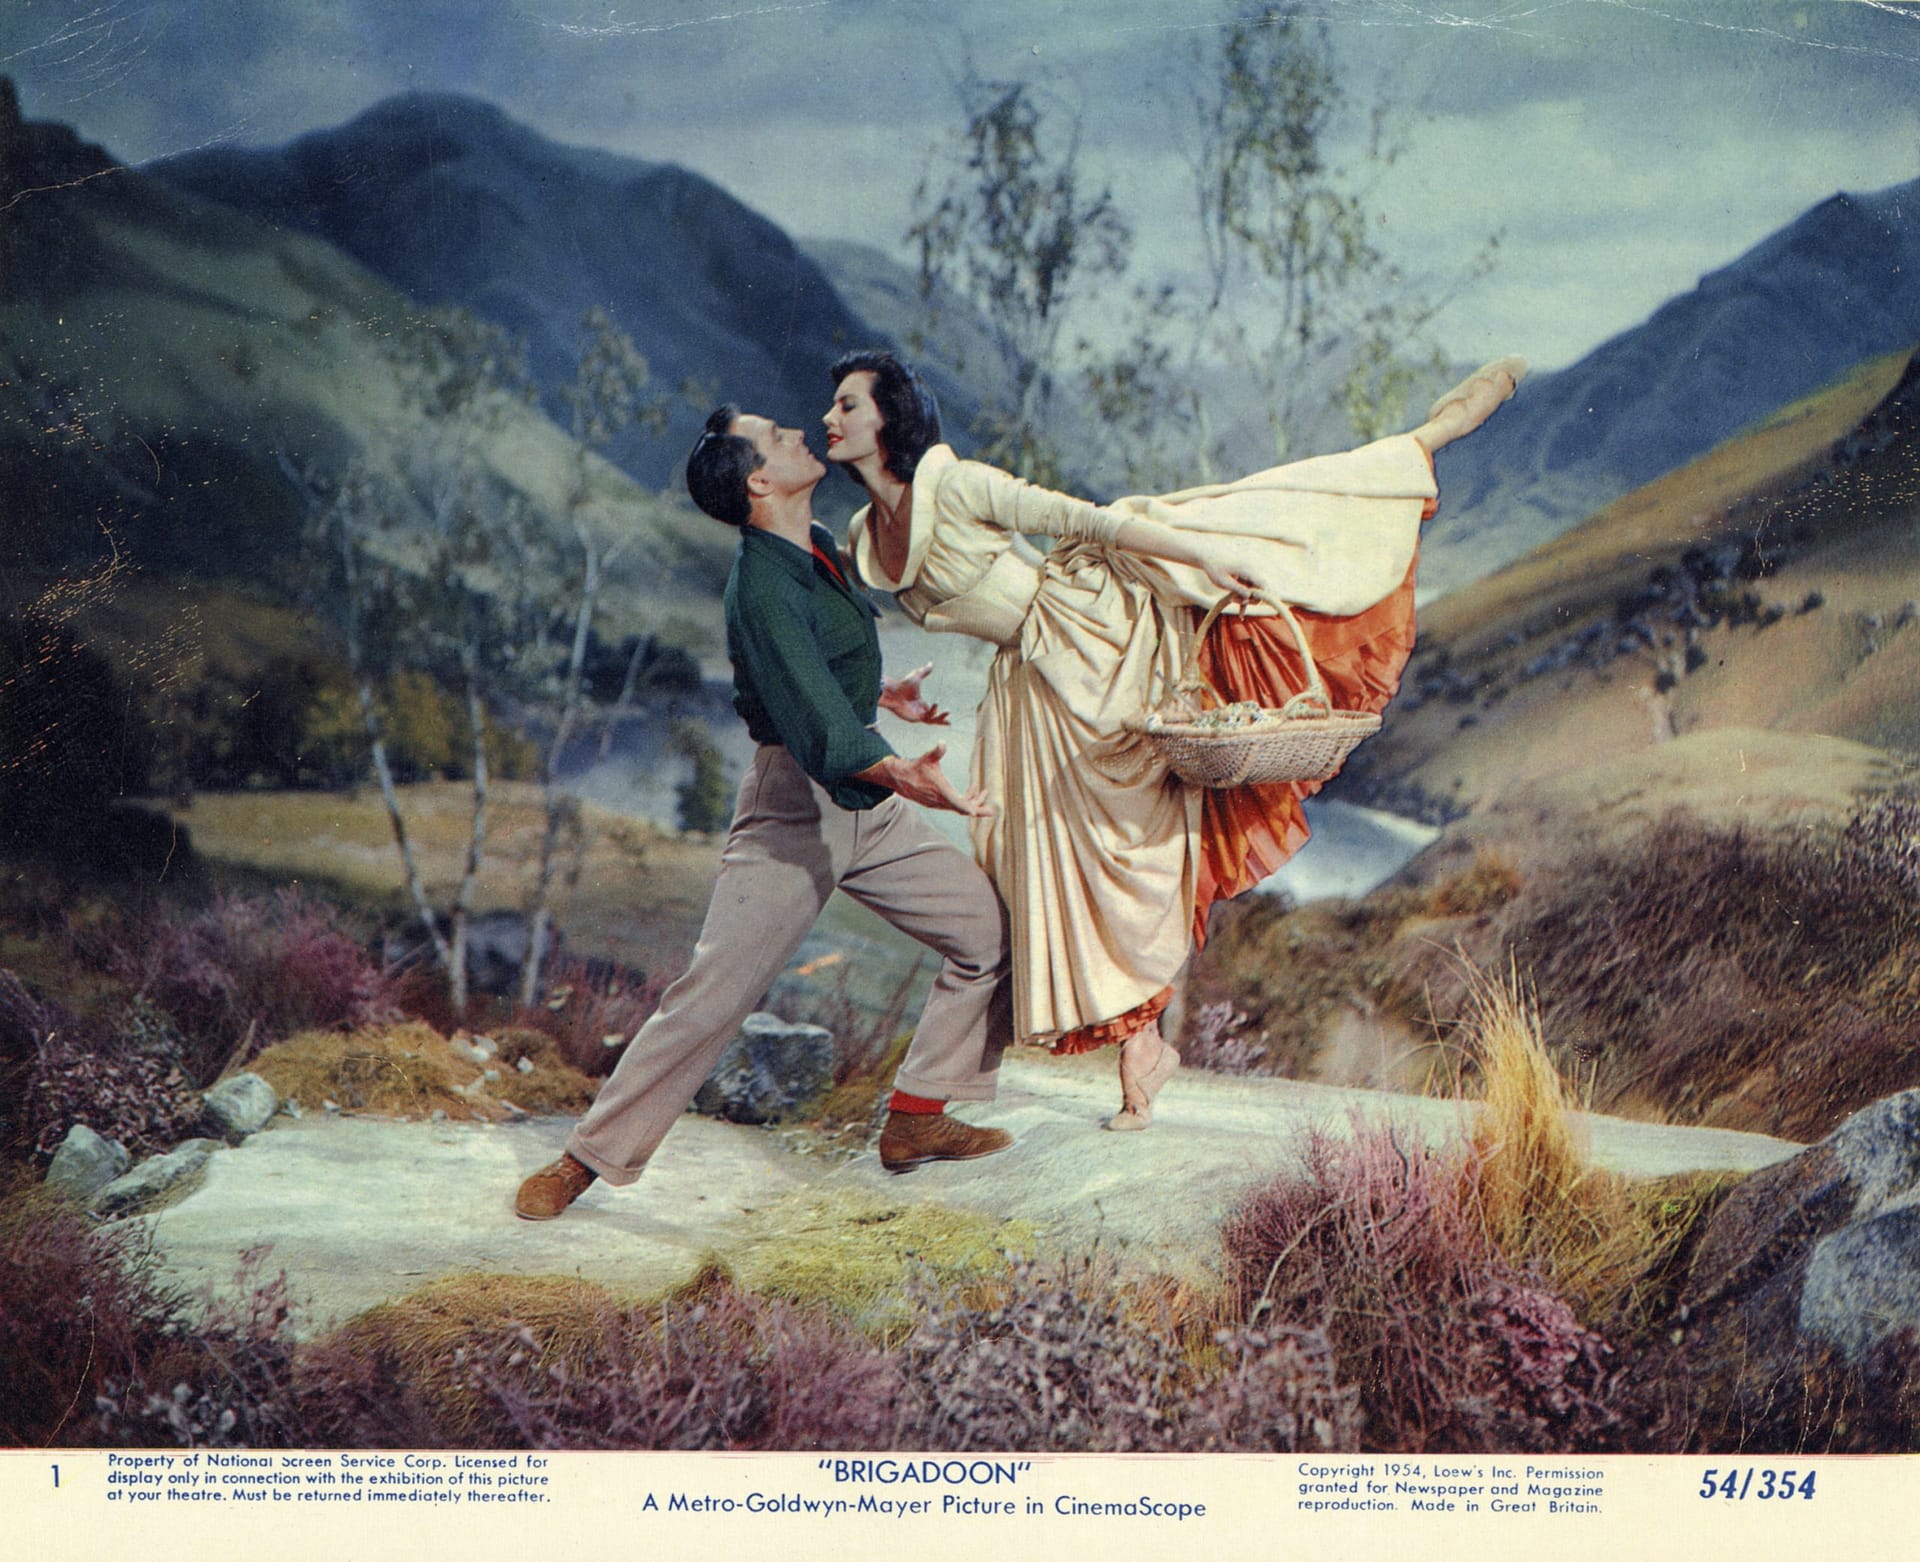 Image: Gene Kelly and Cyd Charisse dancing together in the old Hollywood film Brigadoon